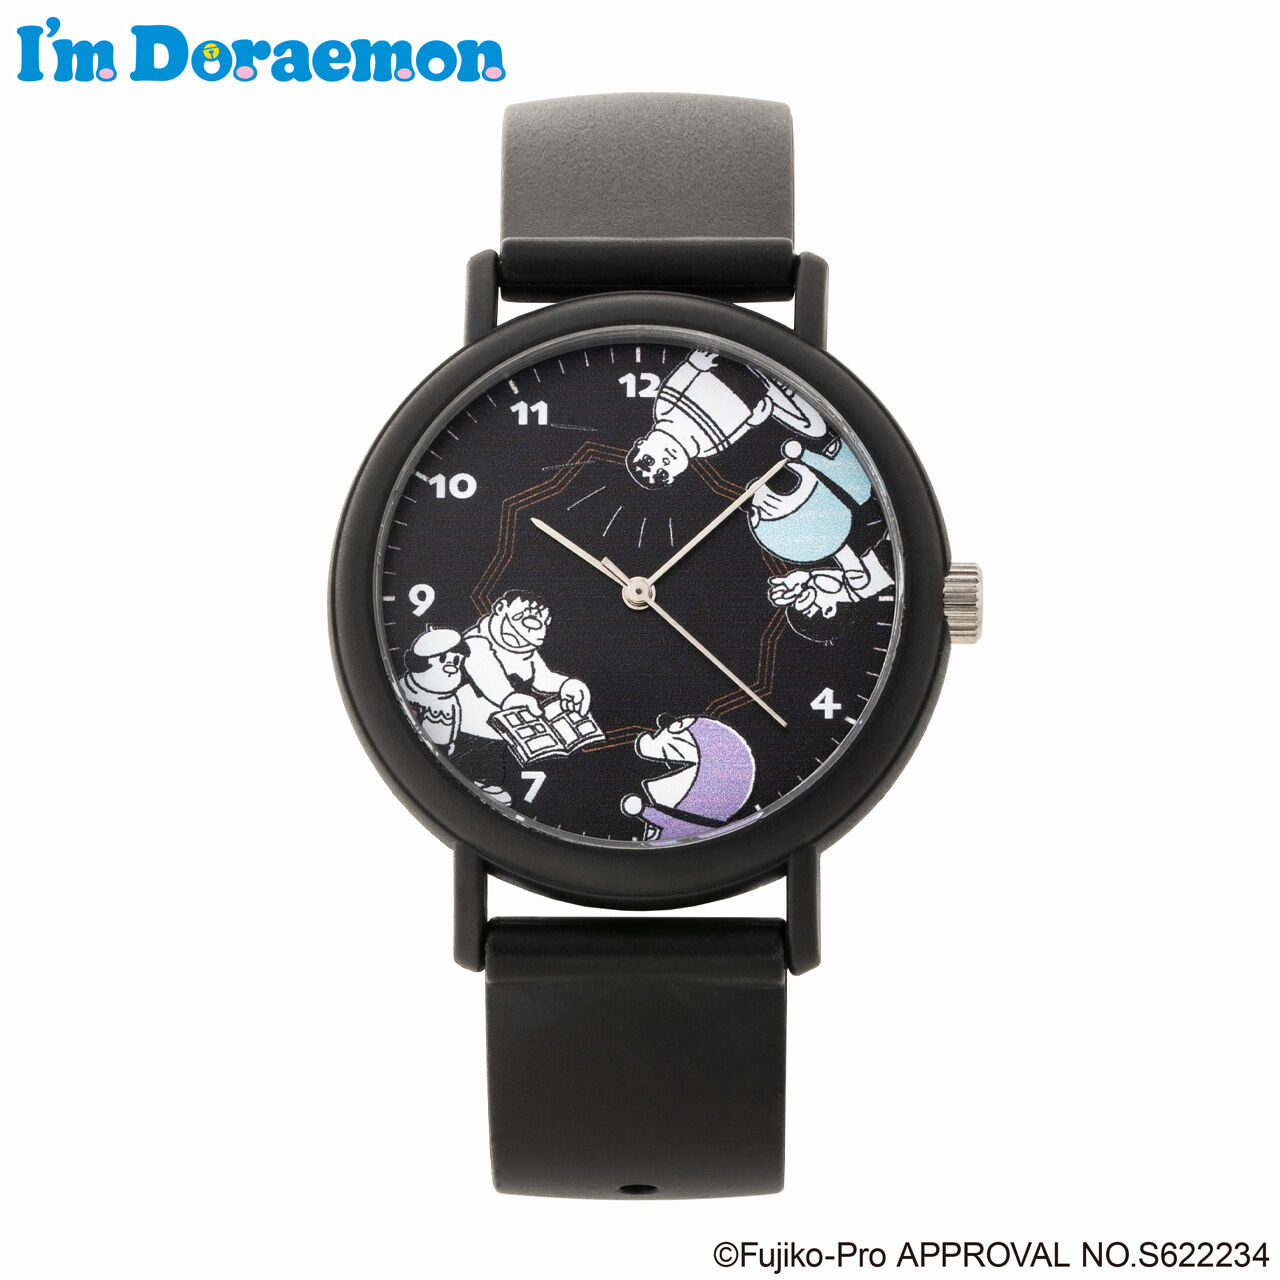 KAORU I'm Doraemon -The second watch is available at the Maruzeki EC shop